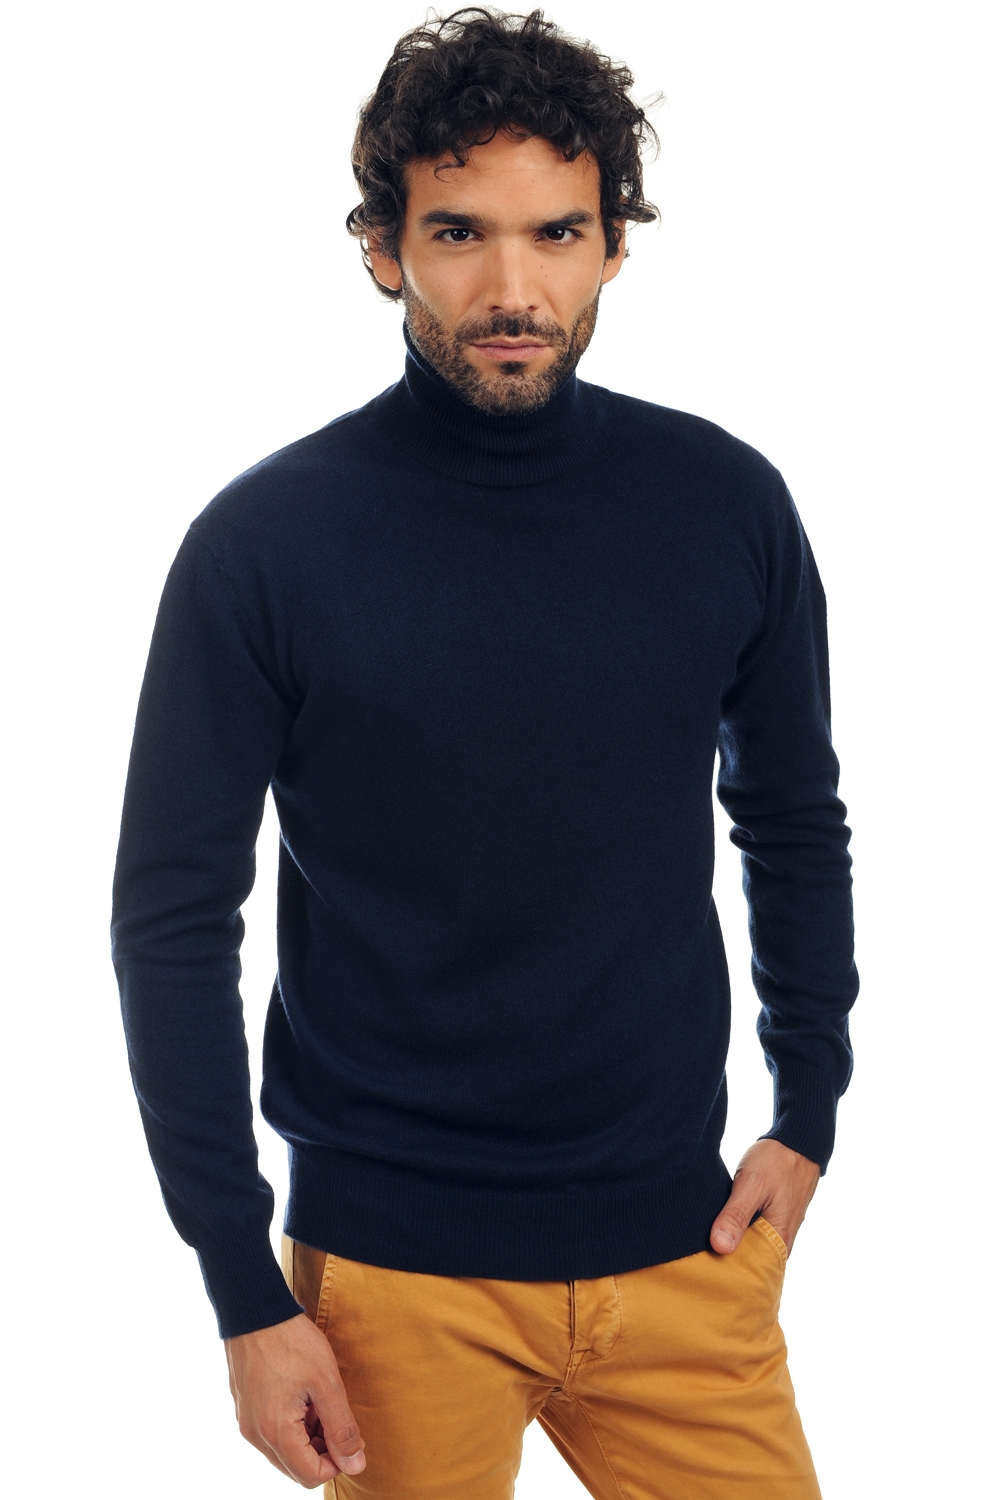 Cachemire pull homme col roule preston marine fonce 4xl